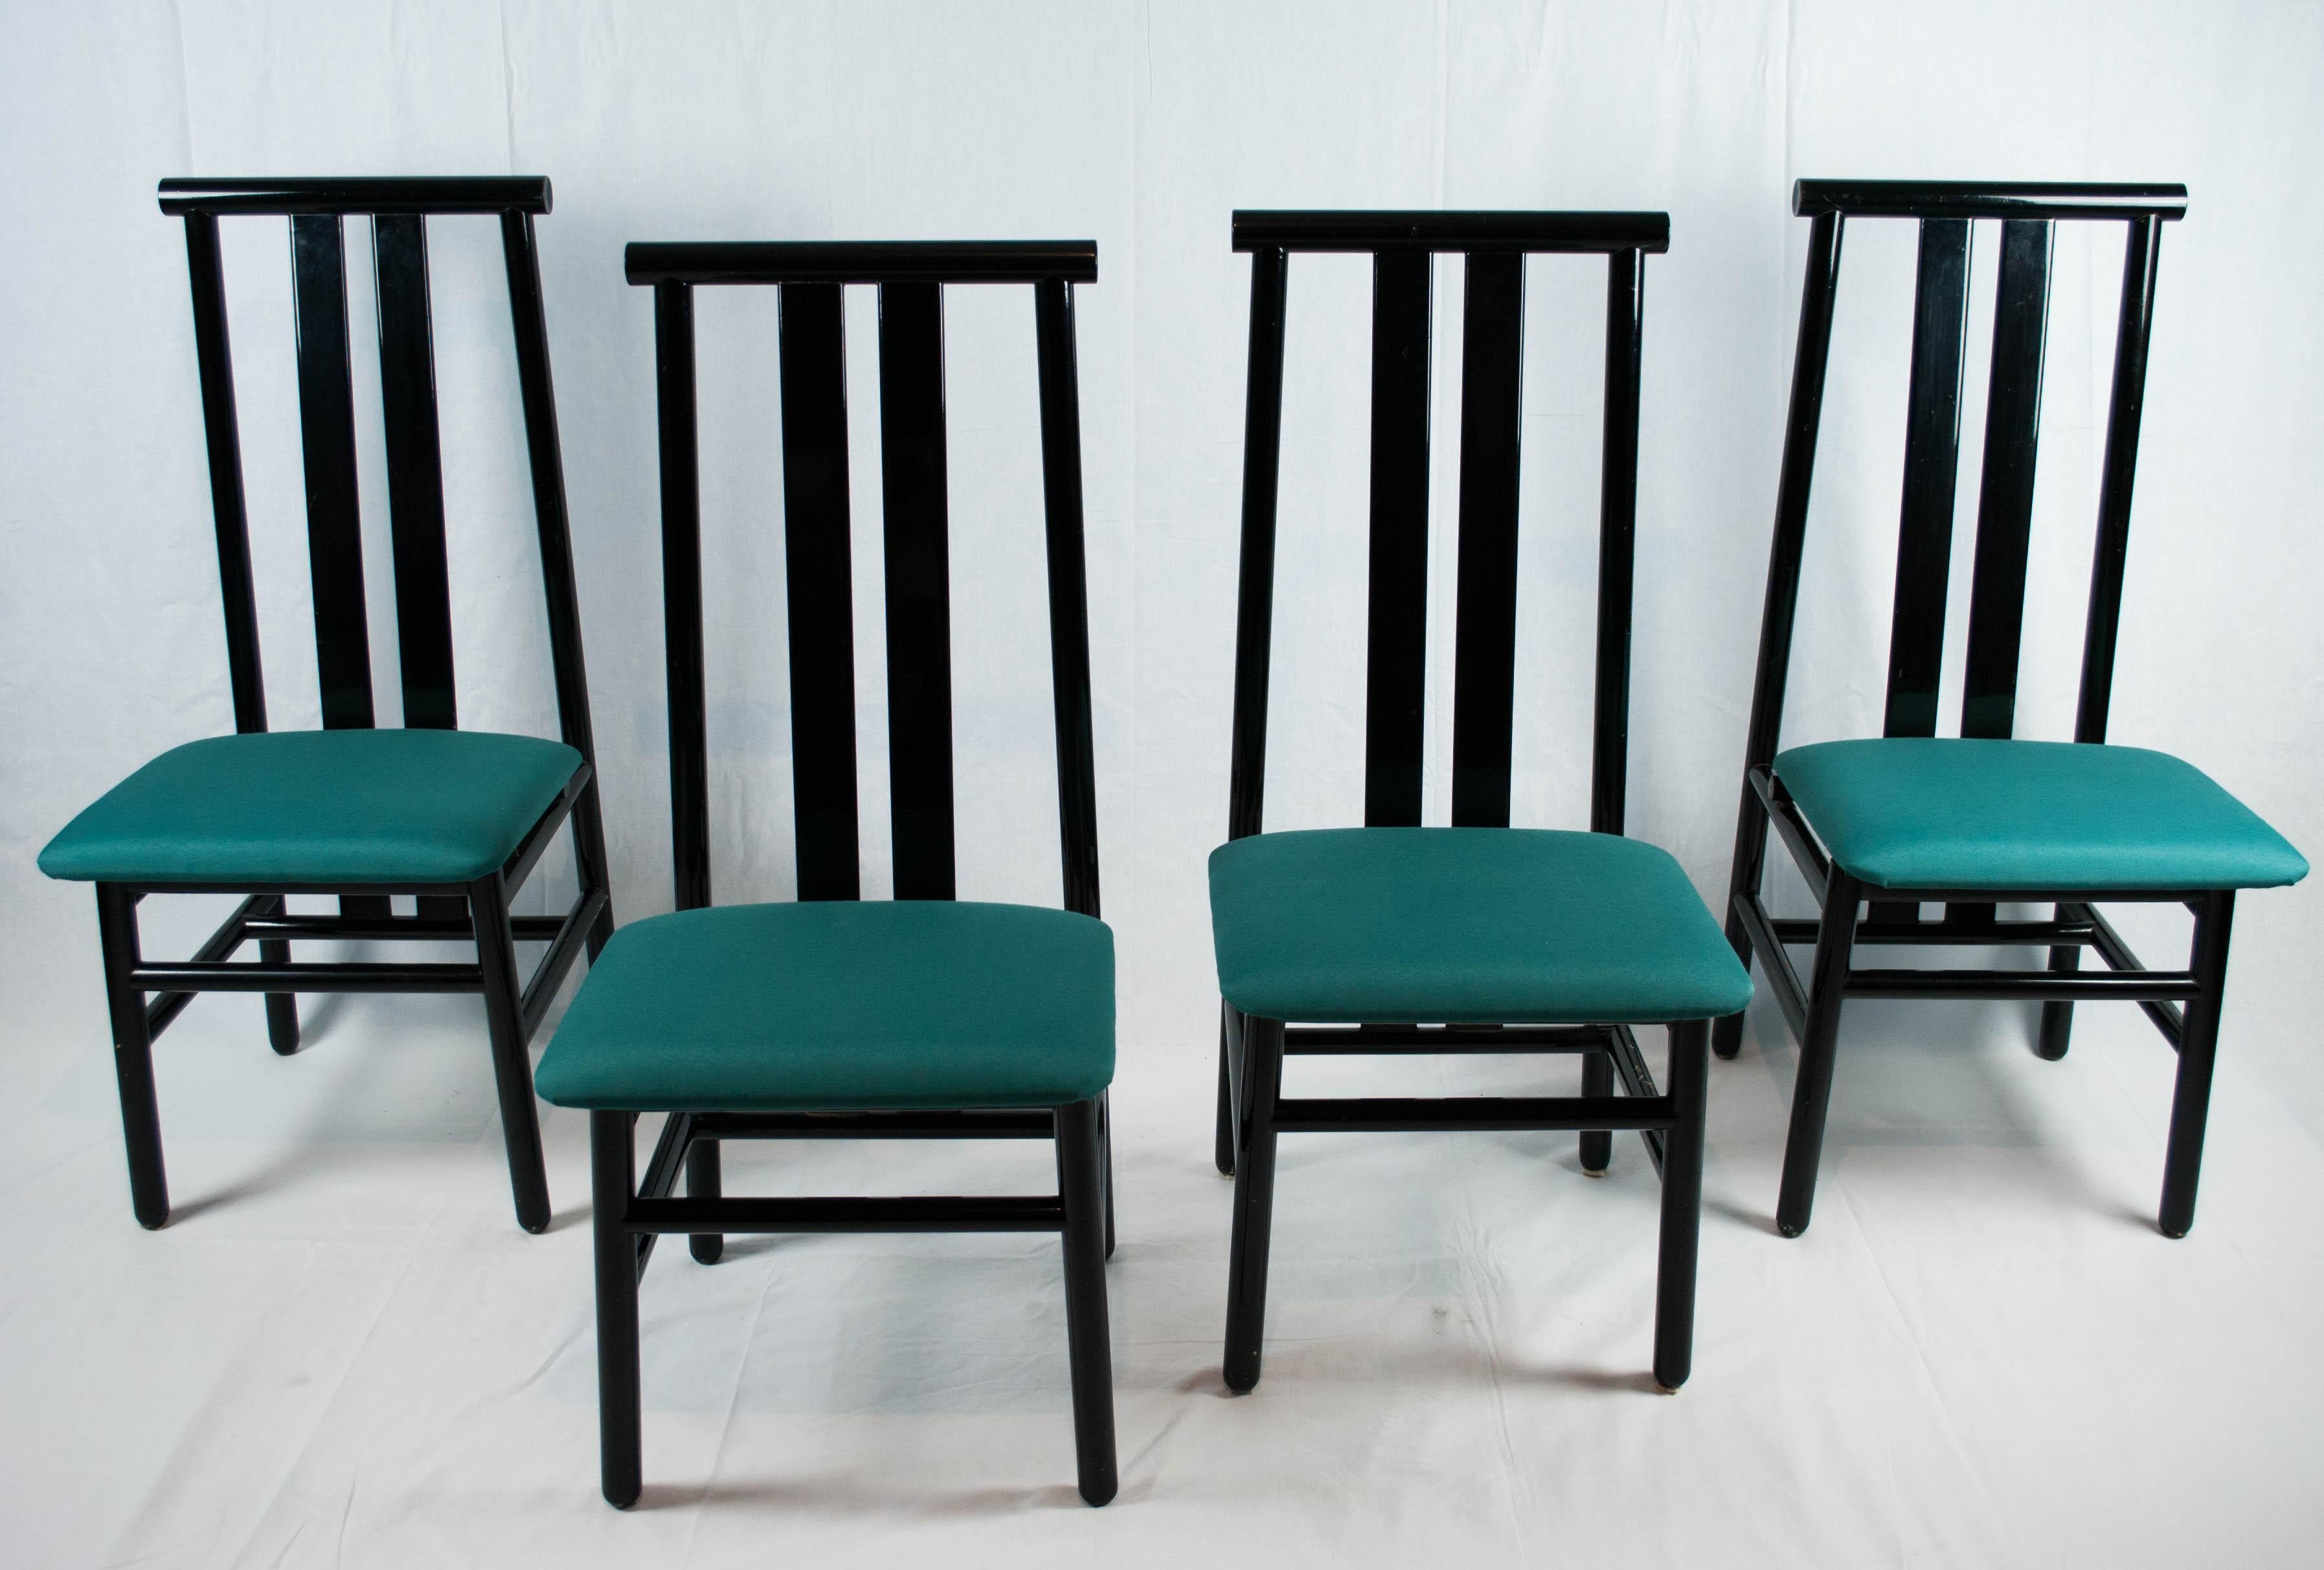 Italian Sarian 'Zea' Modern High-Backed Black Lacquered Chairs for Tisettanta, Italy For Sale